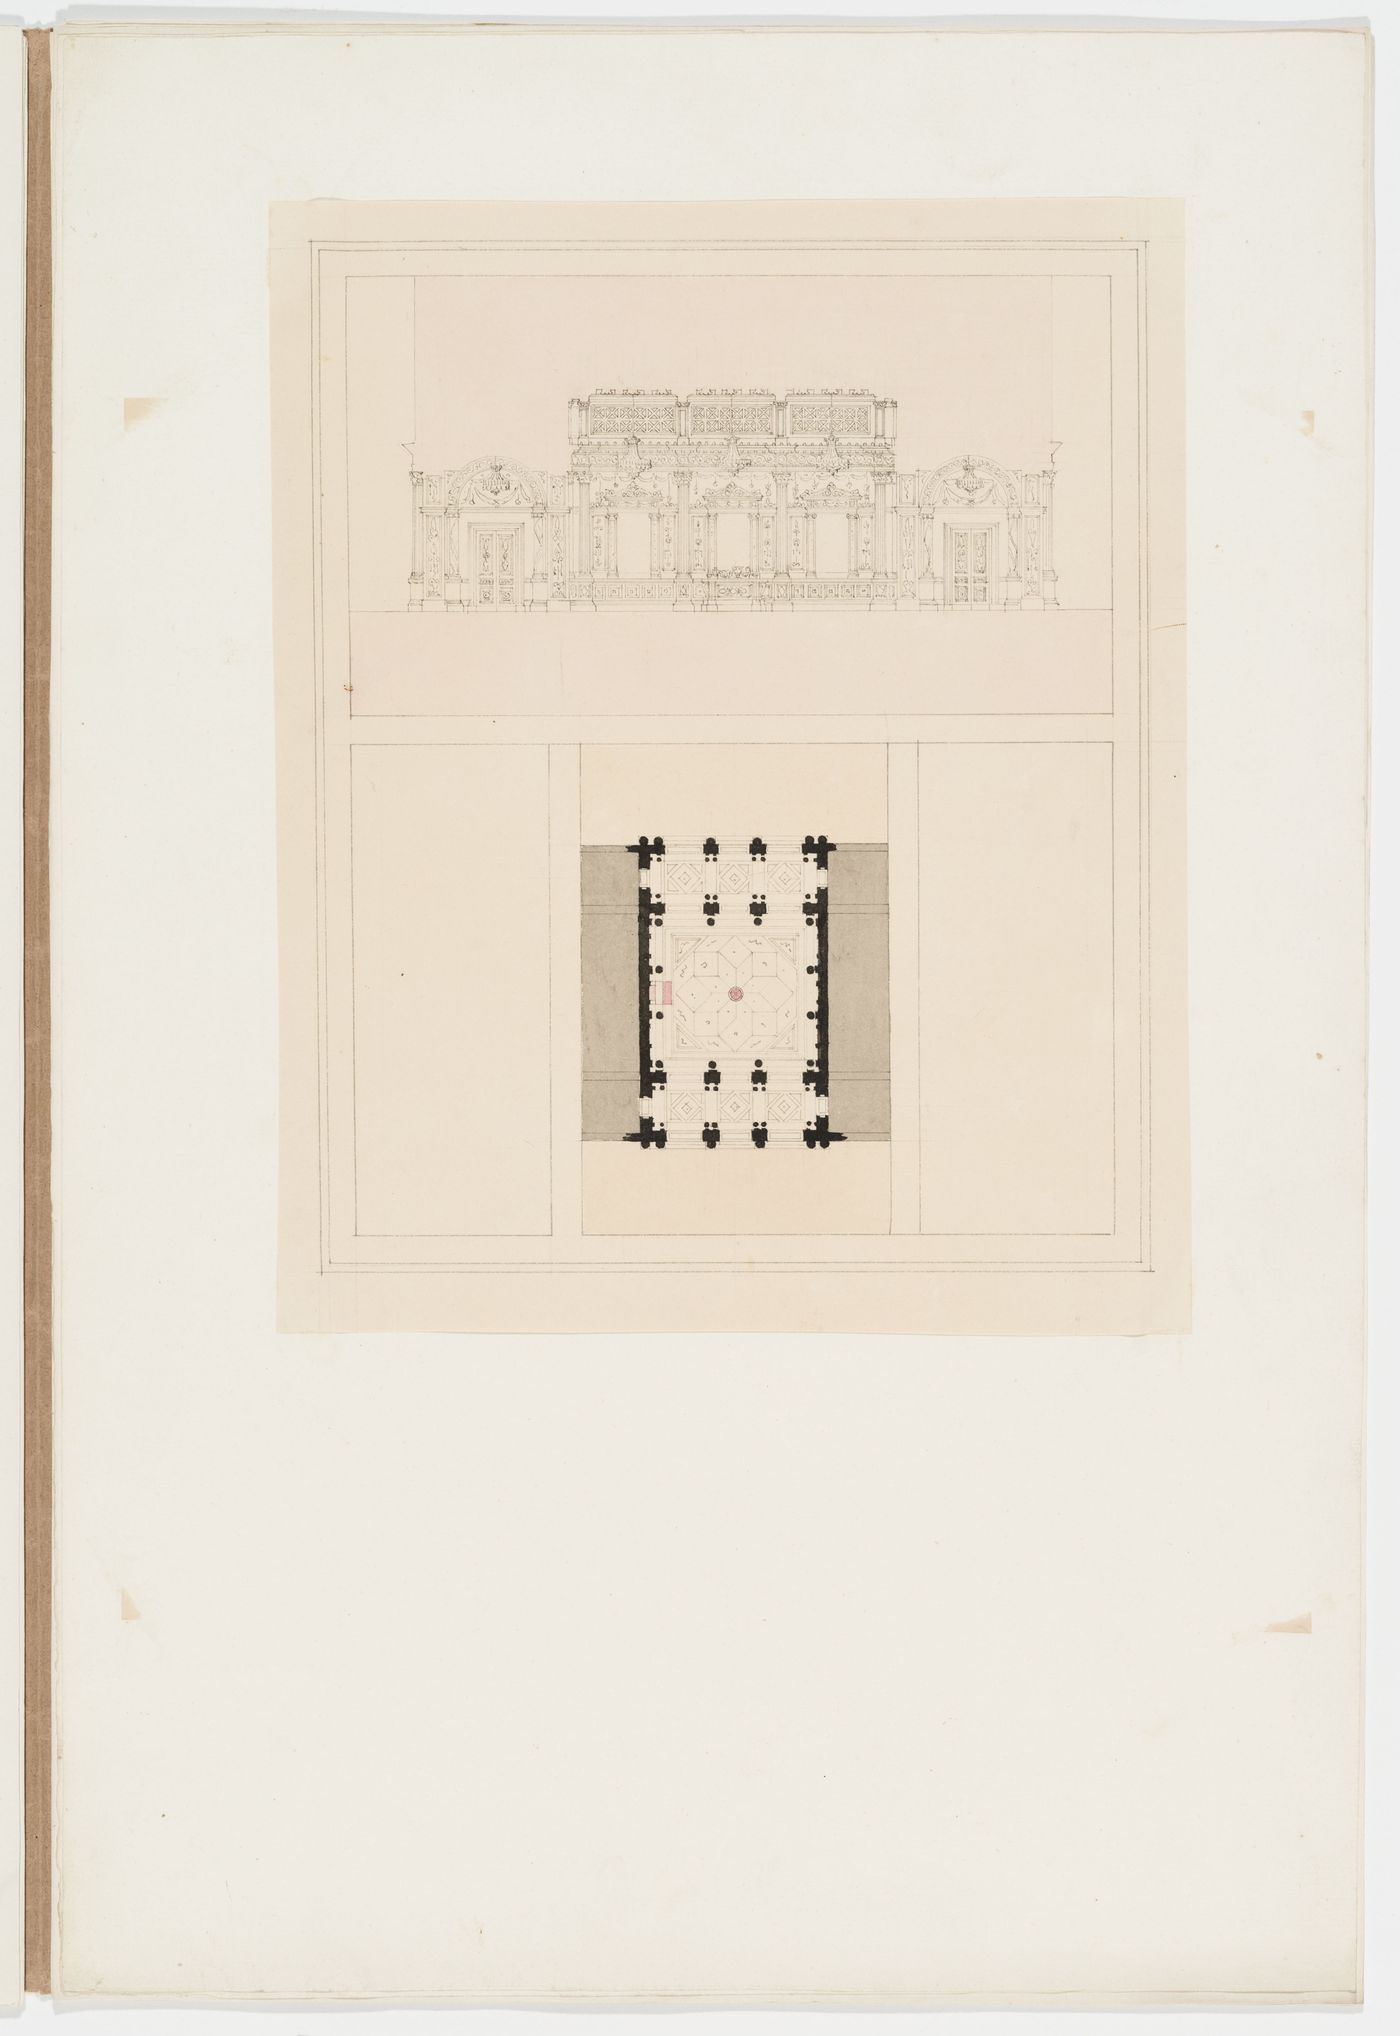 Section and plan for a corridor or vestibule